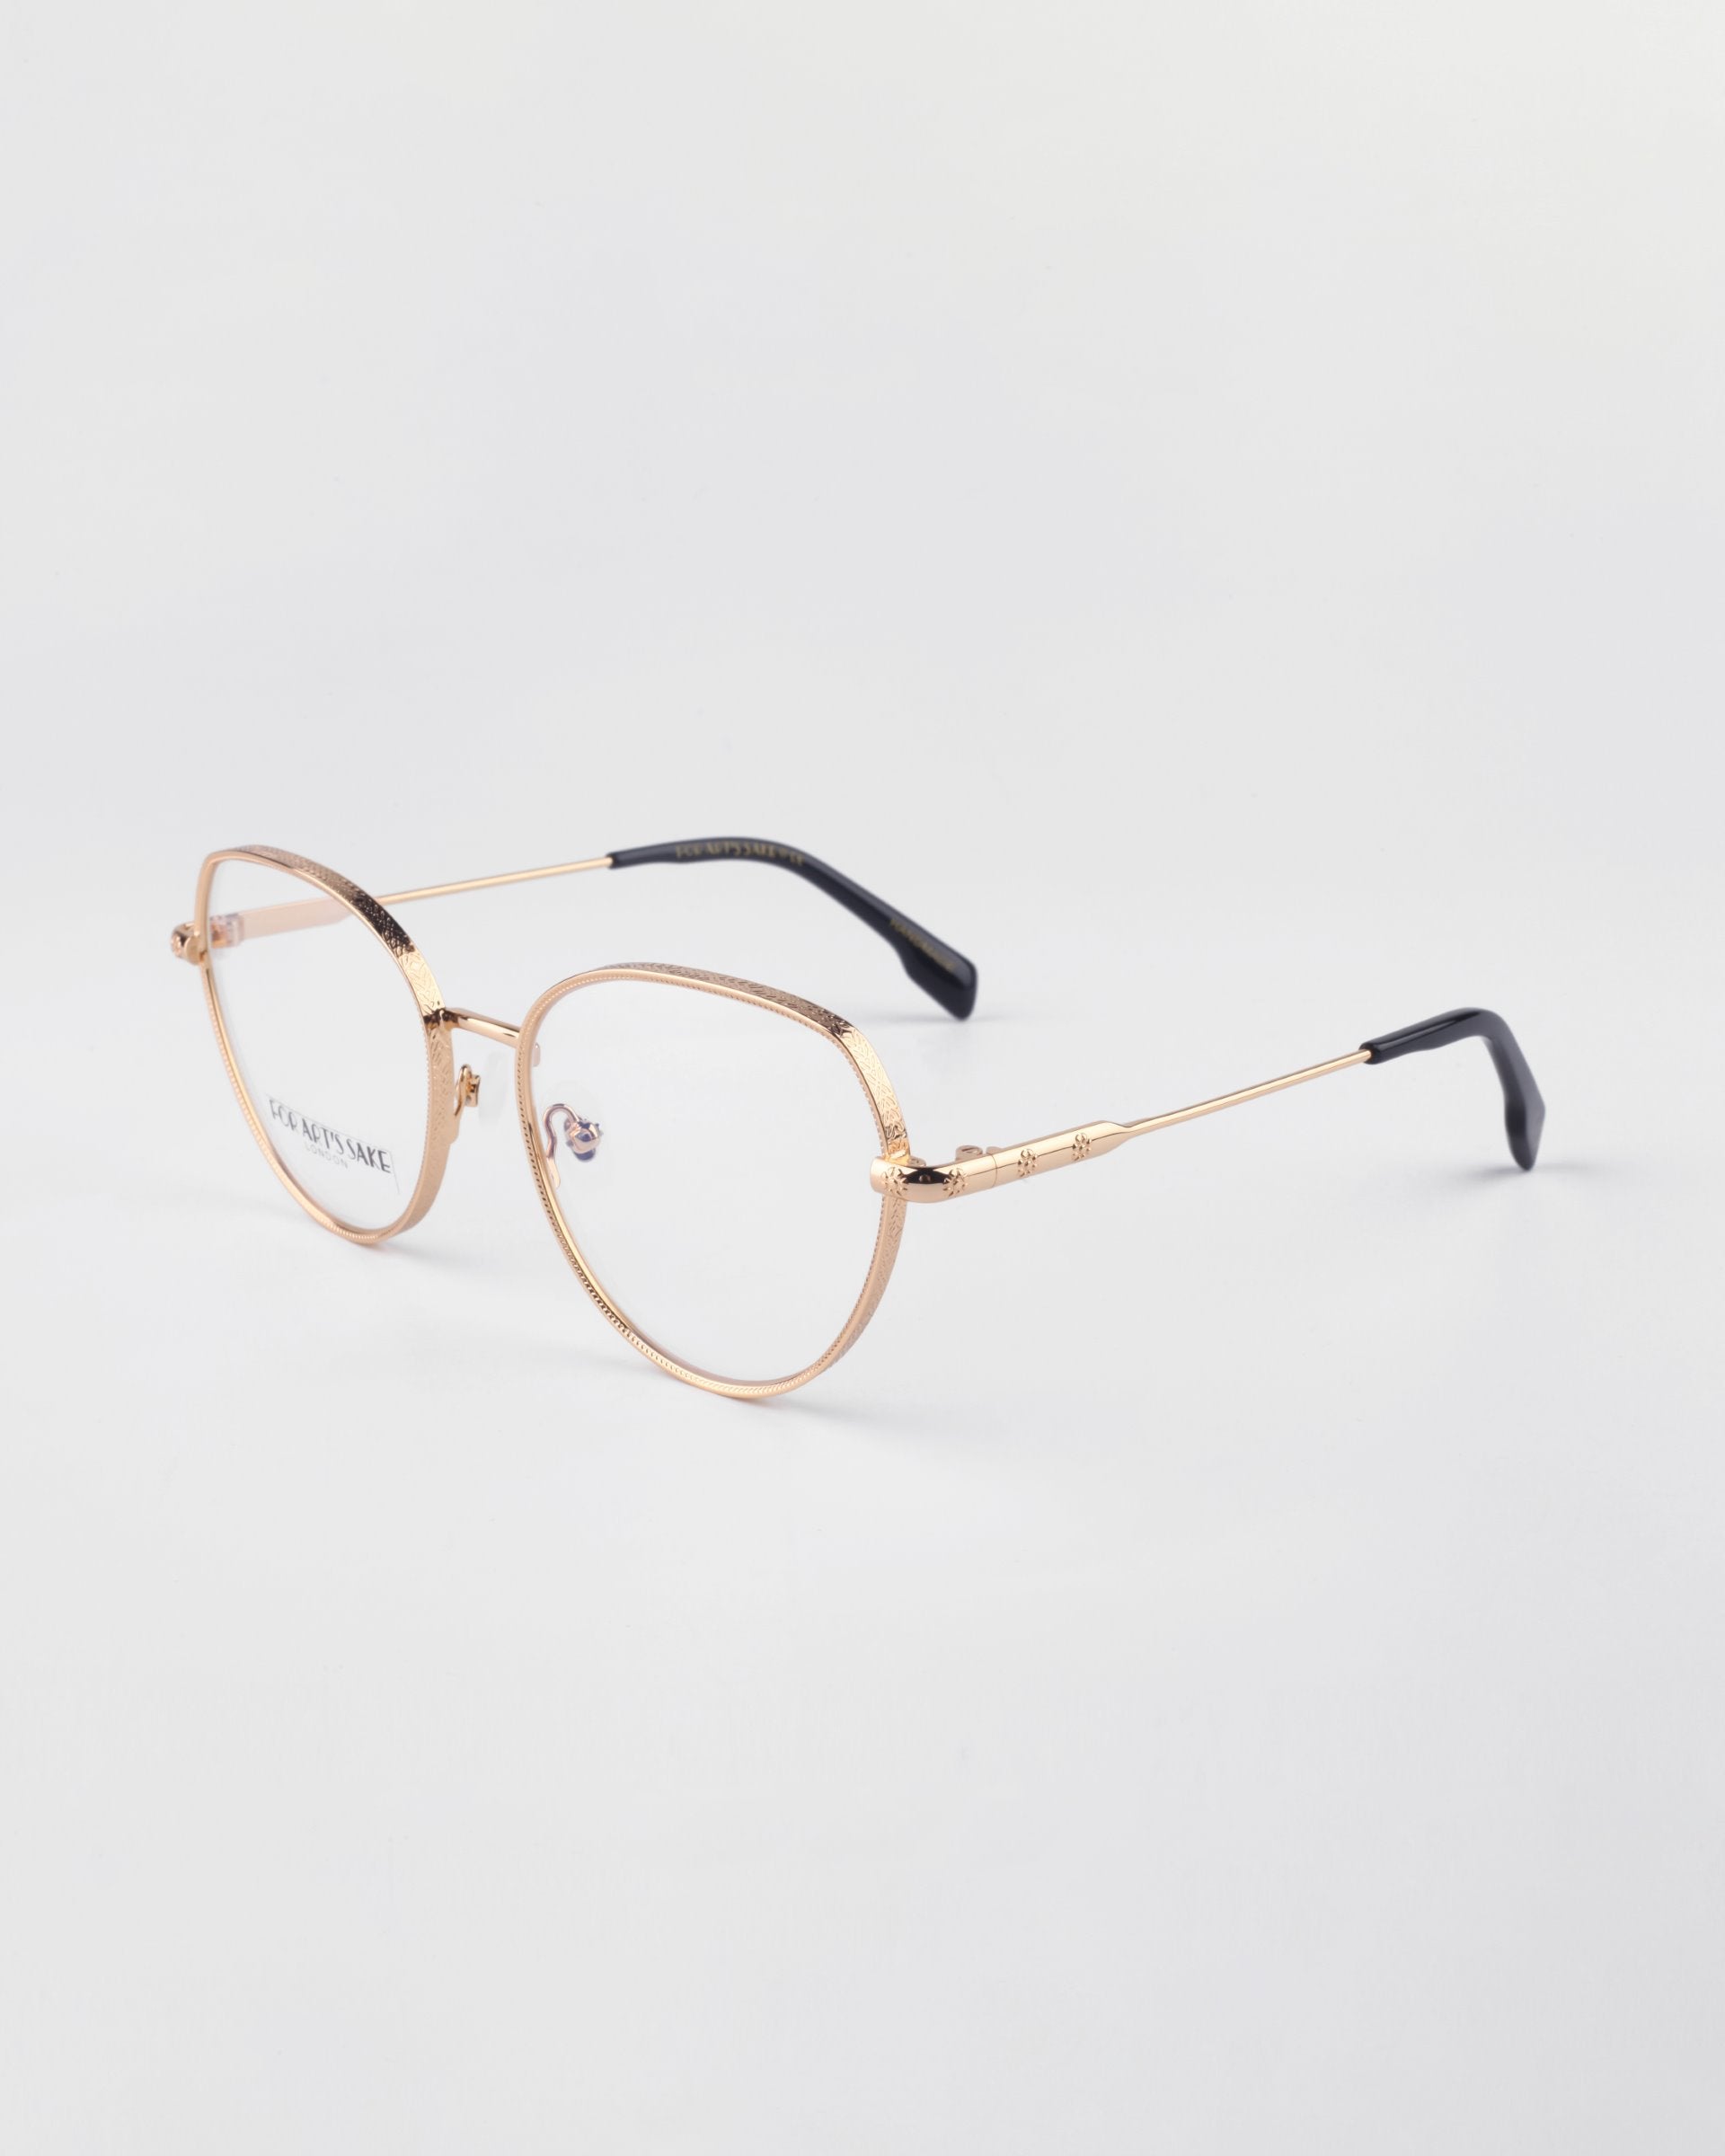 A pair of Frida Floral eyeglasses by For Art's Sake® with round lenses and black temple tips rests on a white surface. The glasses have a sleek, minimalist design with thin metal frames, a subtle bridge, and prescription lenses.